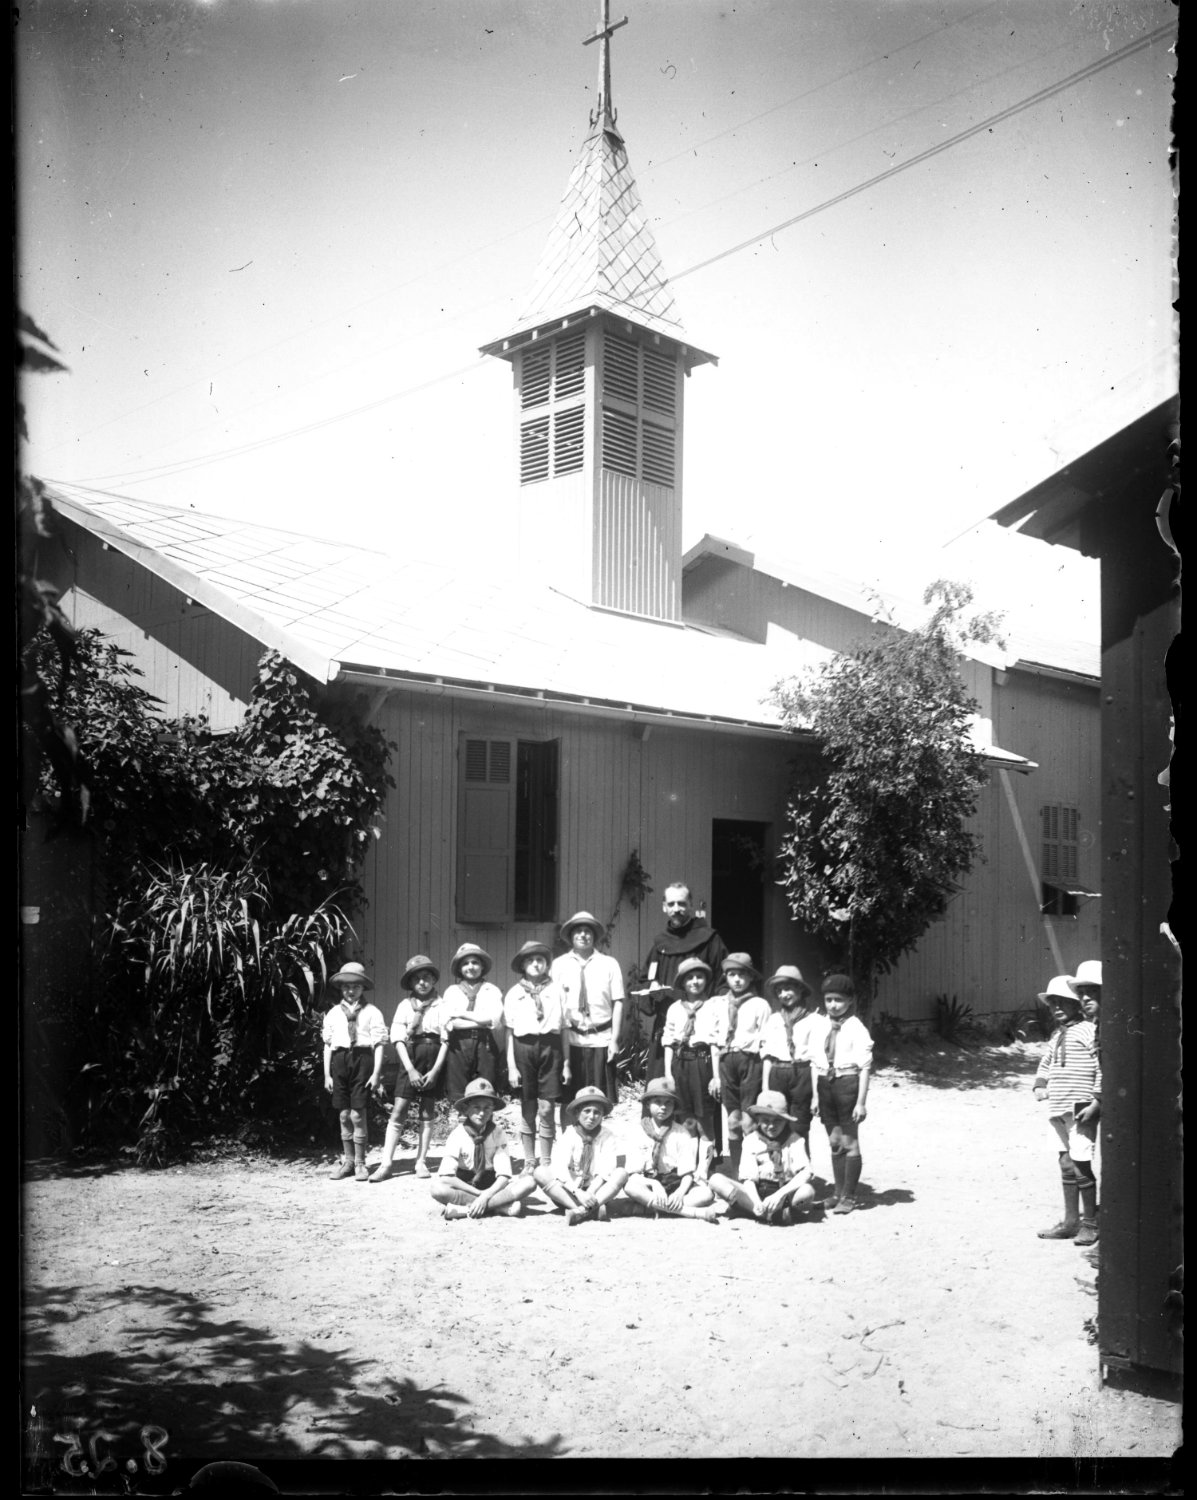 Children and leader in front of church